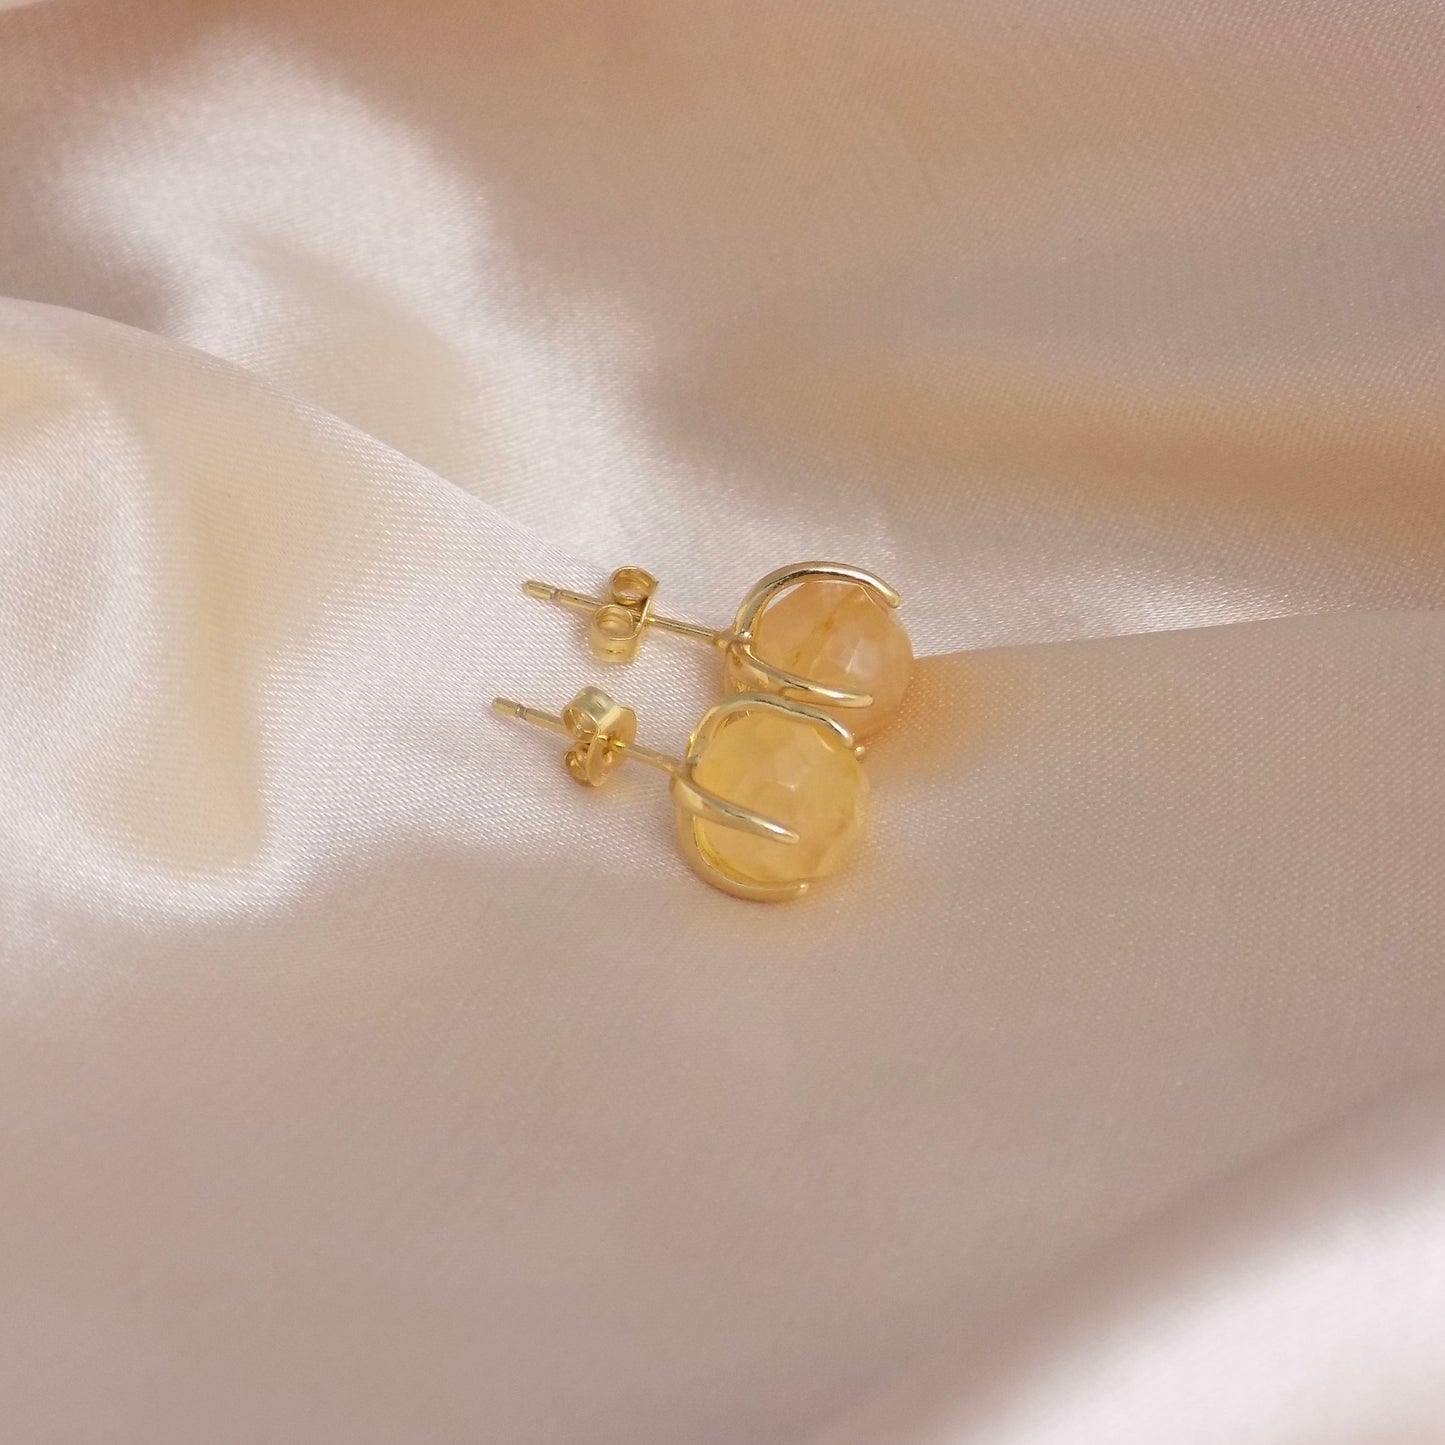 Citrine Earrings Studs Gold, Raw Crystal Earrings, Yellow Gemstone Stud Earring For Women, Gifts for Mom, M6-733